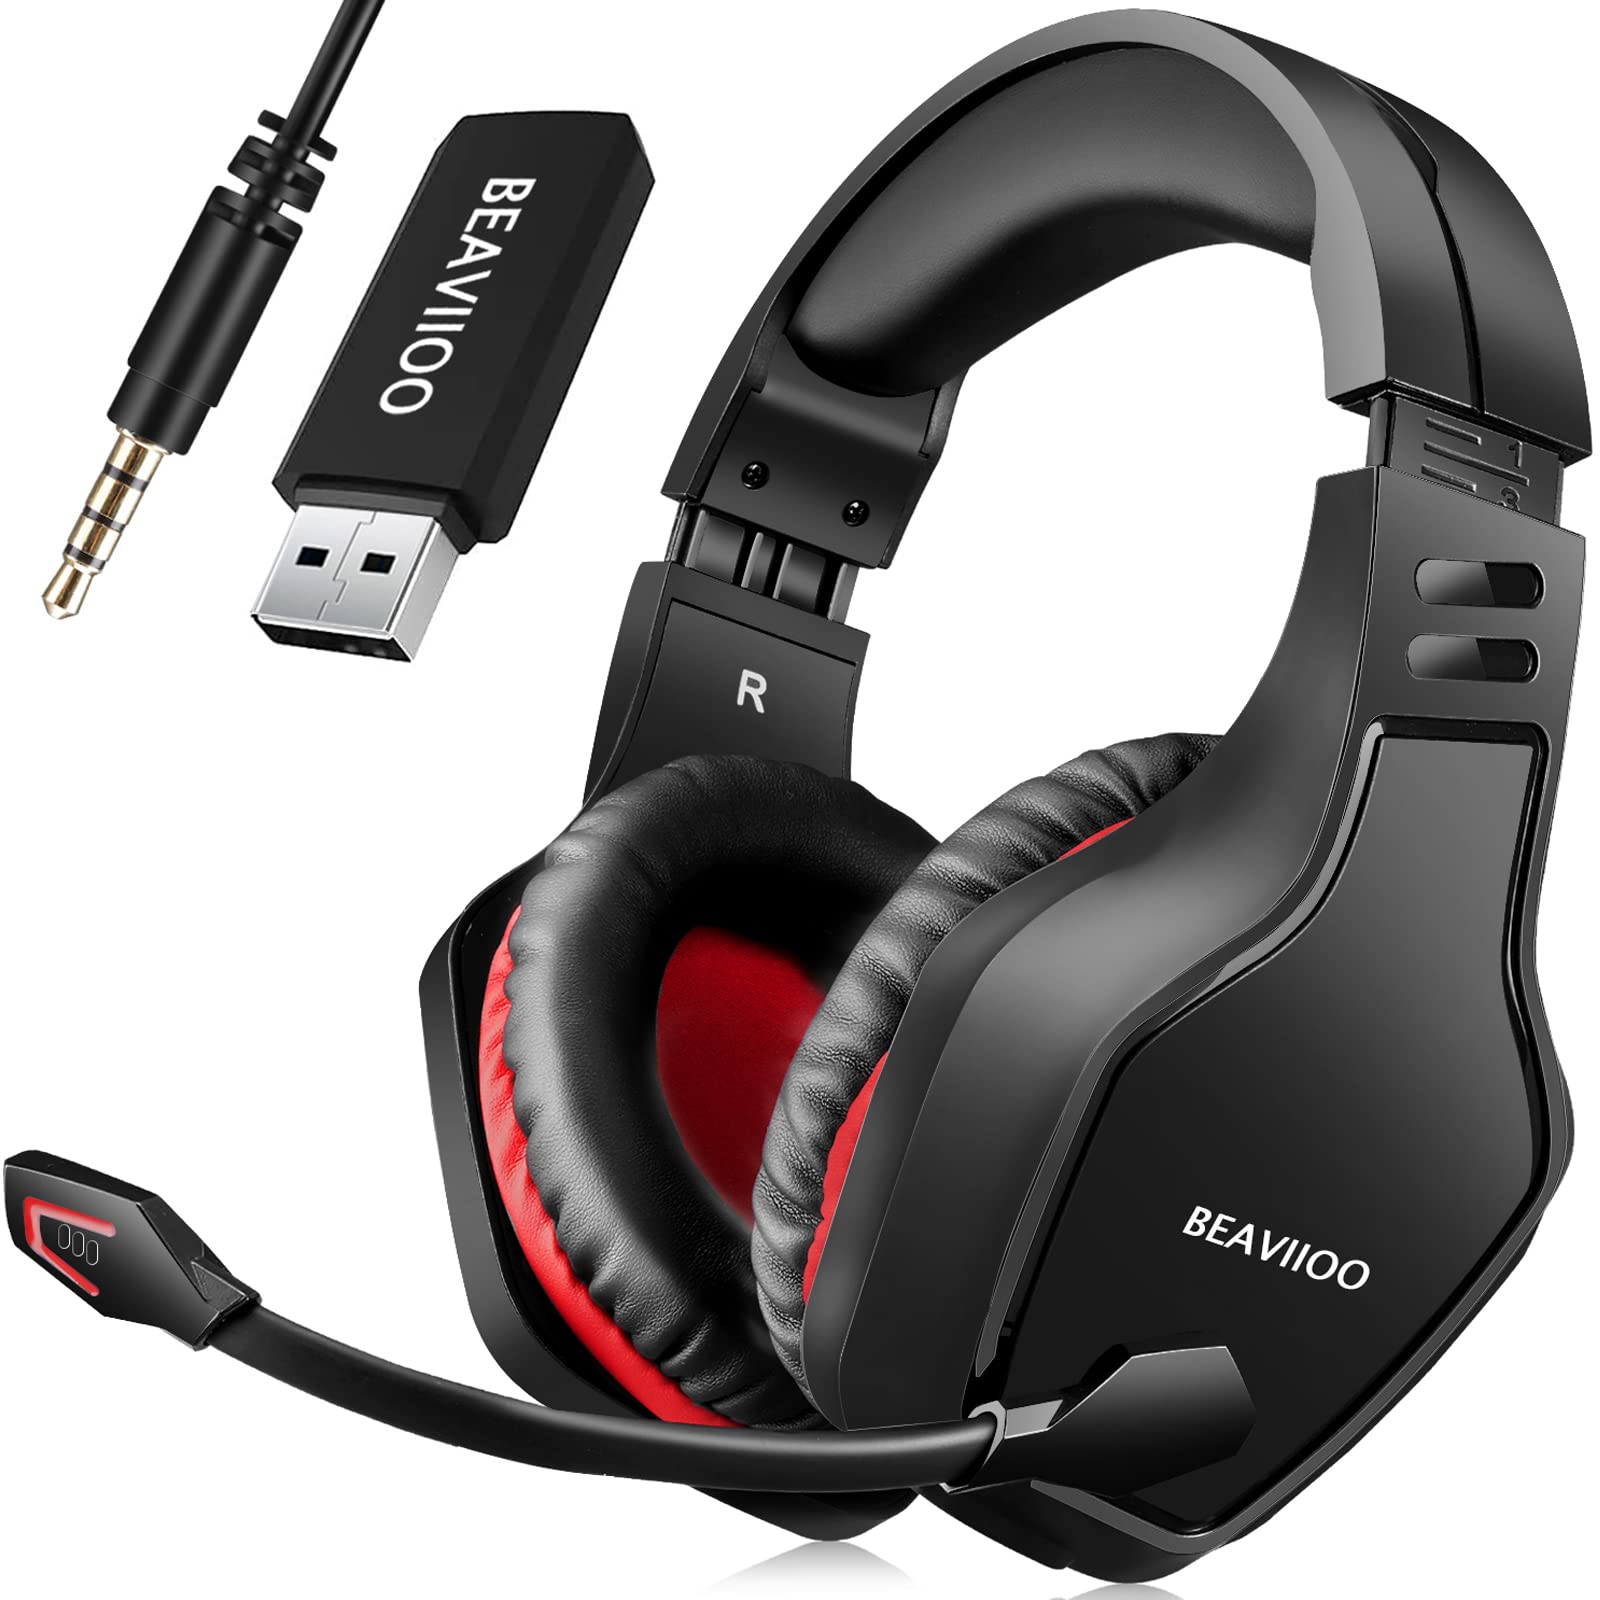 BEAVIIOO Wireless Gaming Headset PC, PS5, PS4-50-Hr Battery, Noise-Canceling Mic, Surround Sound, for Immersive Gaming, Virtual Meetings, All-Day Comfort, Gamers & Professionals